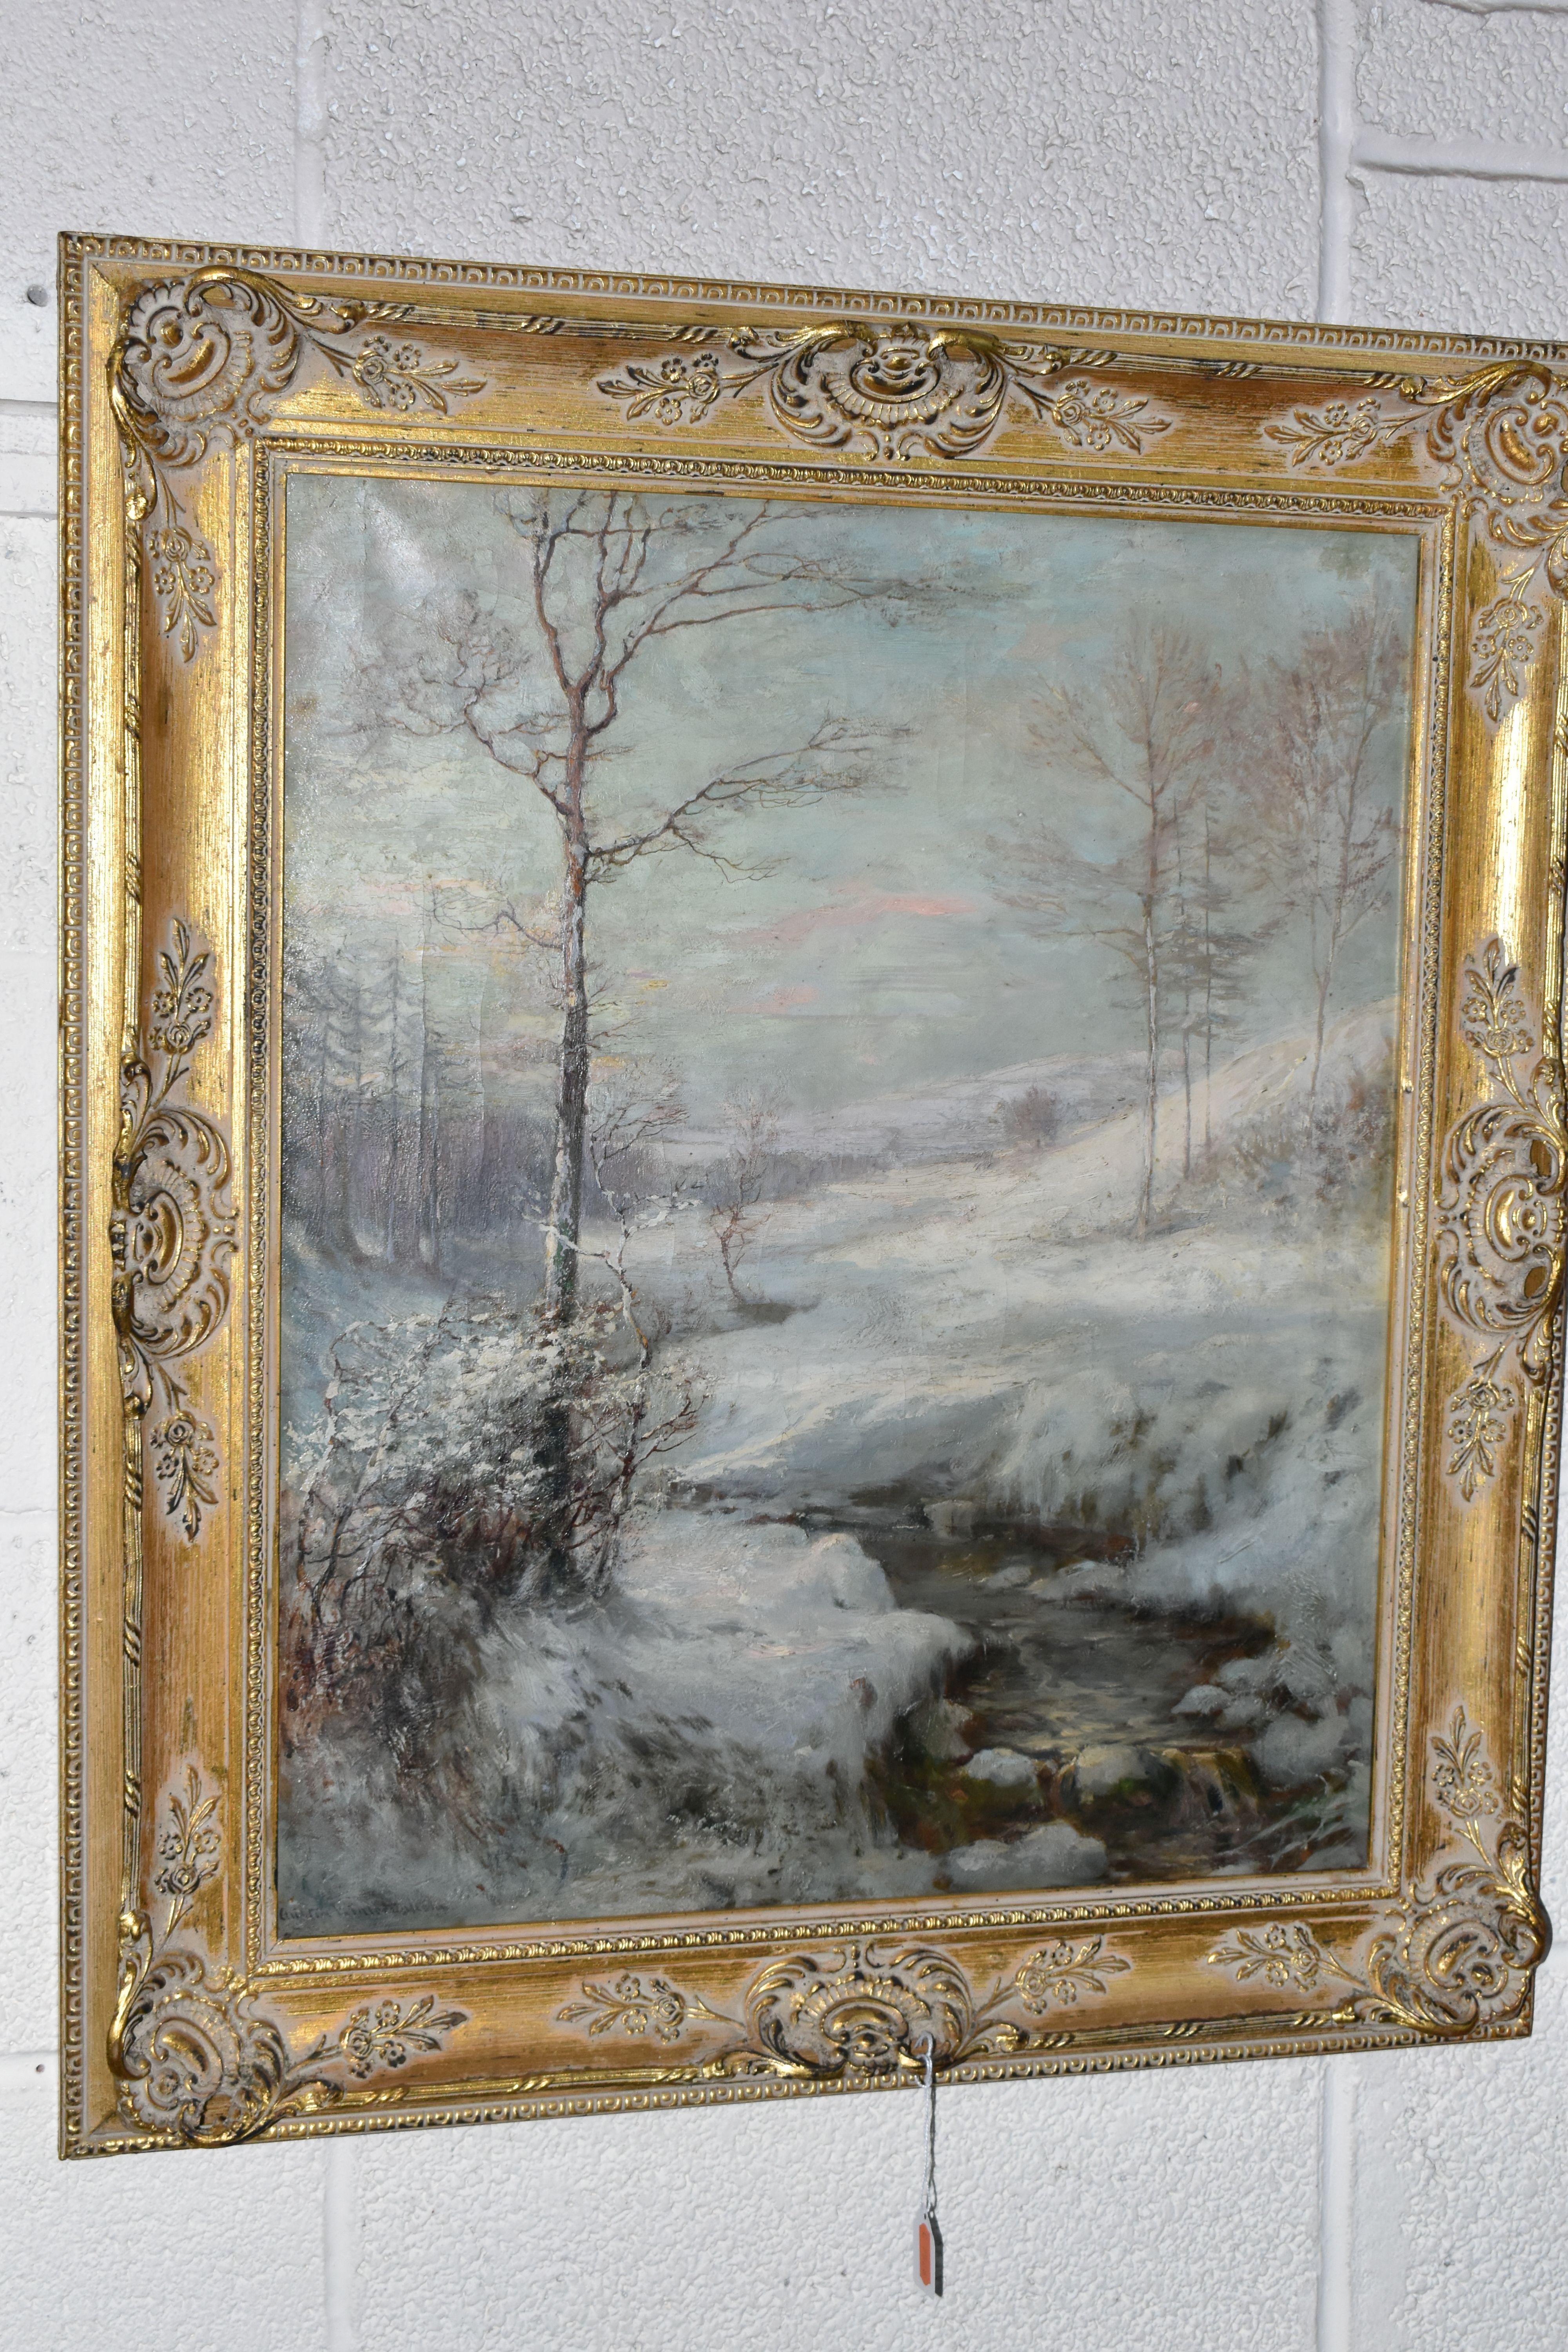 AUSTIN WINTERBOTTOM (1860-1919) TWO WINTER LANDSCAPES, the first depicts a stream running through - Image 6 of 10